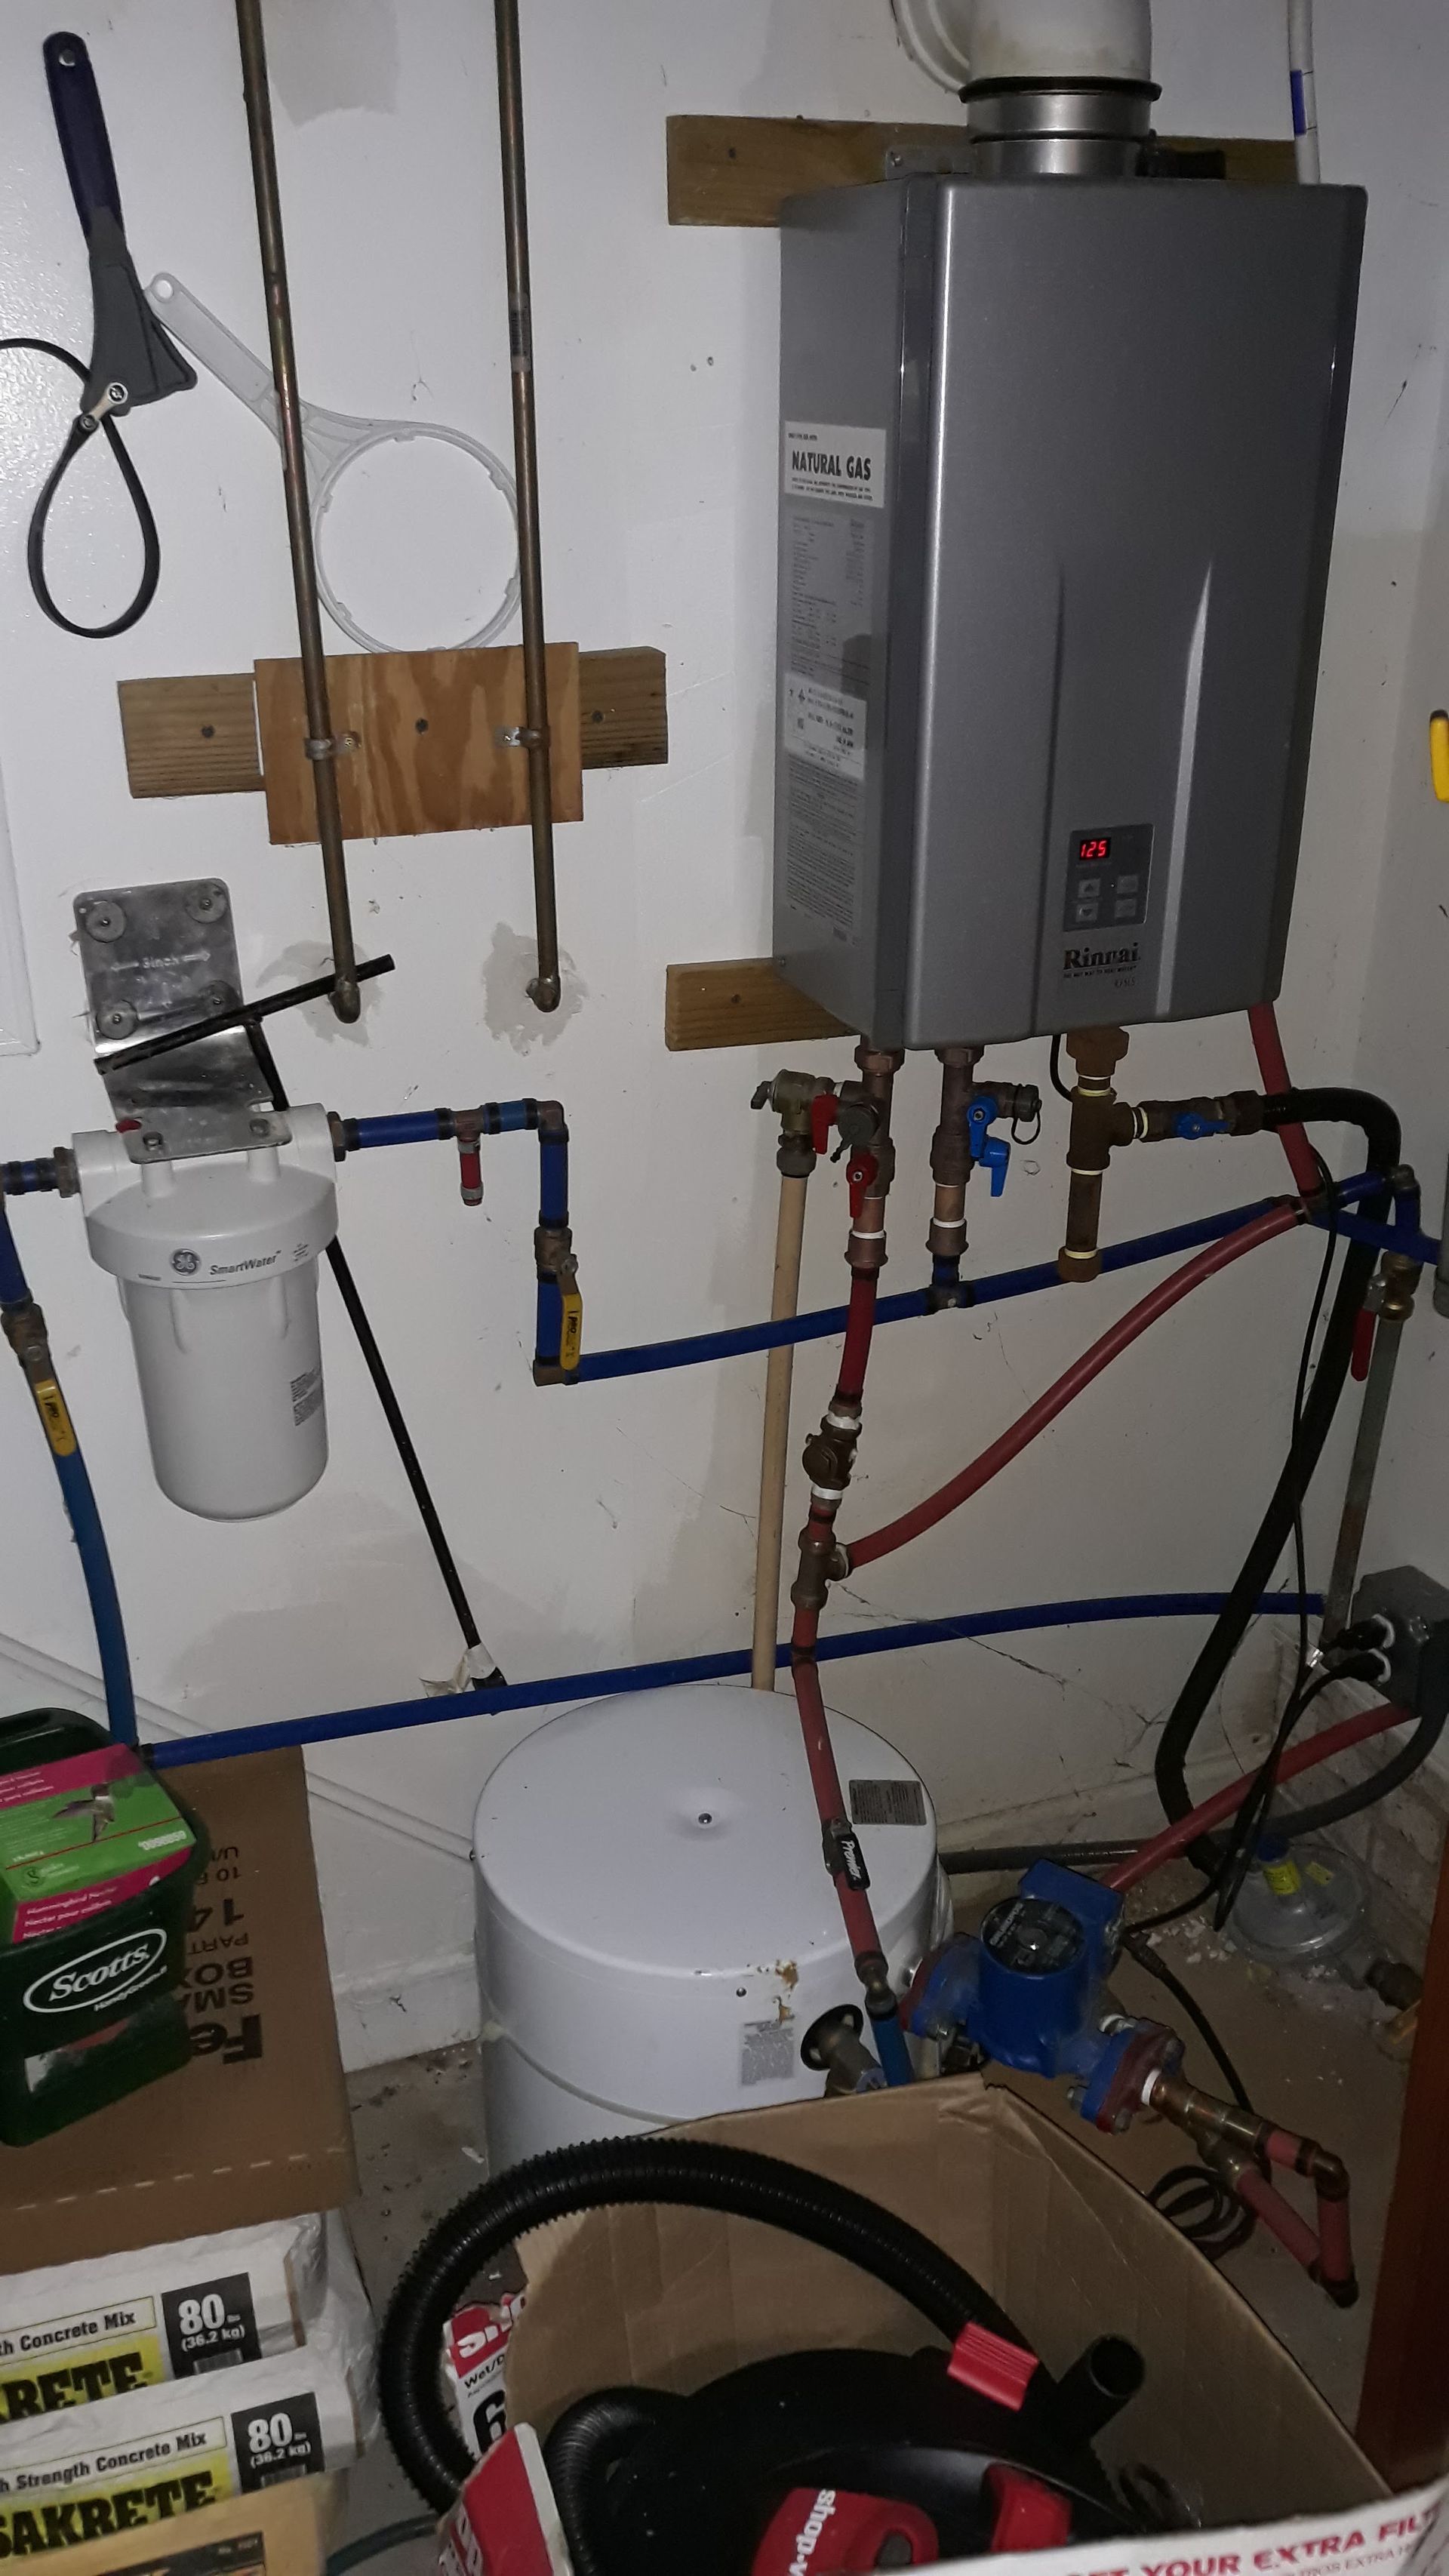 a water heater is sitting next to a water heater in a room